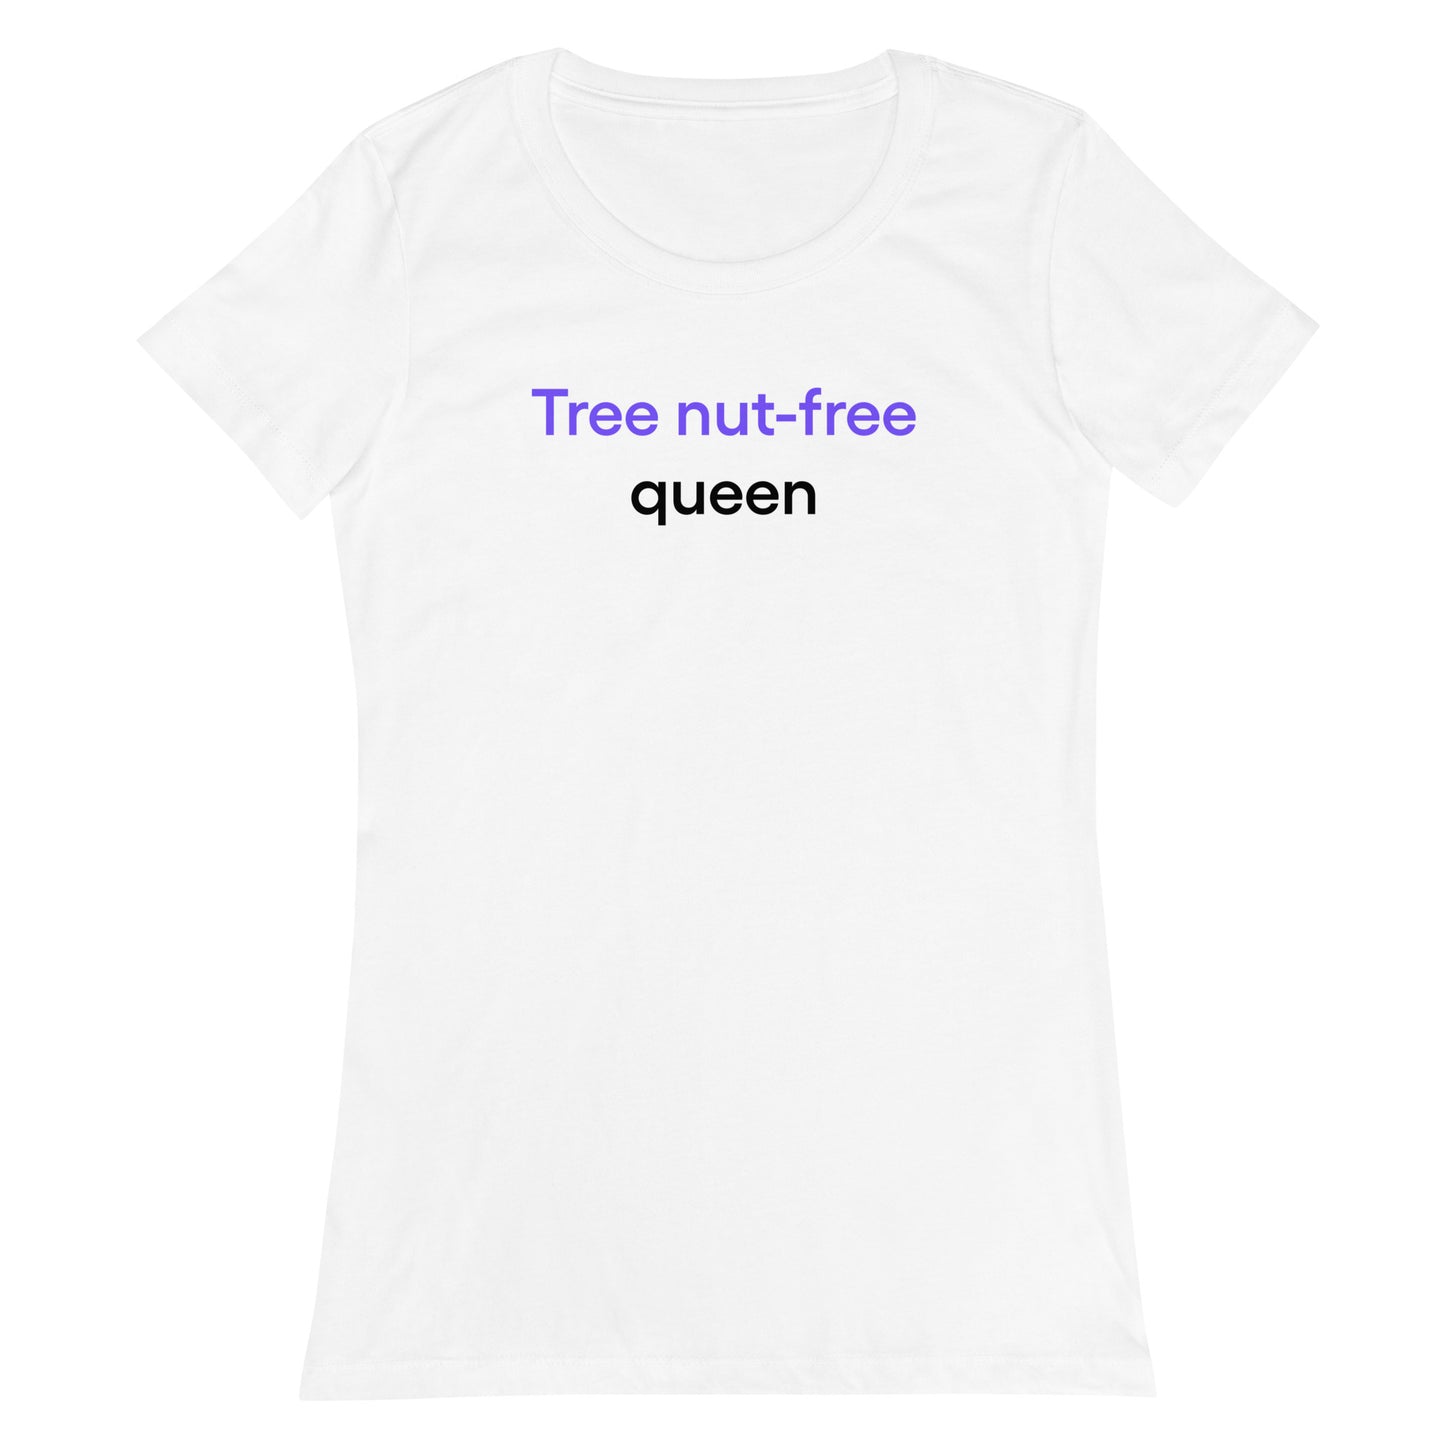 Tree nut-free queen | Women’s fitted t-shirt